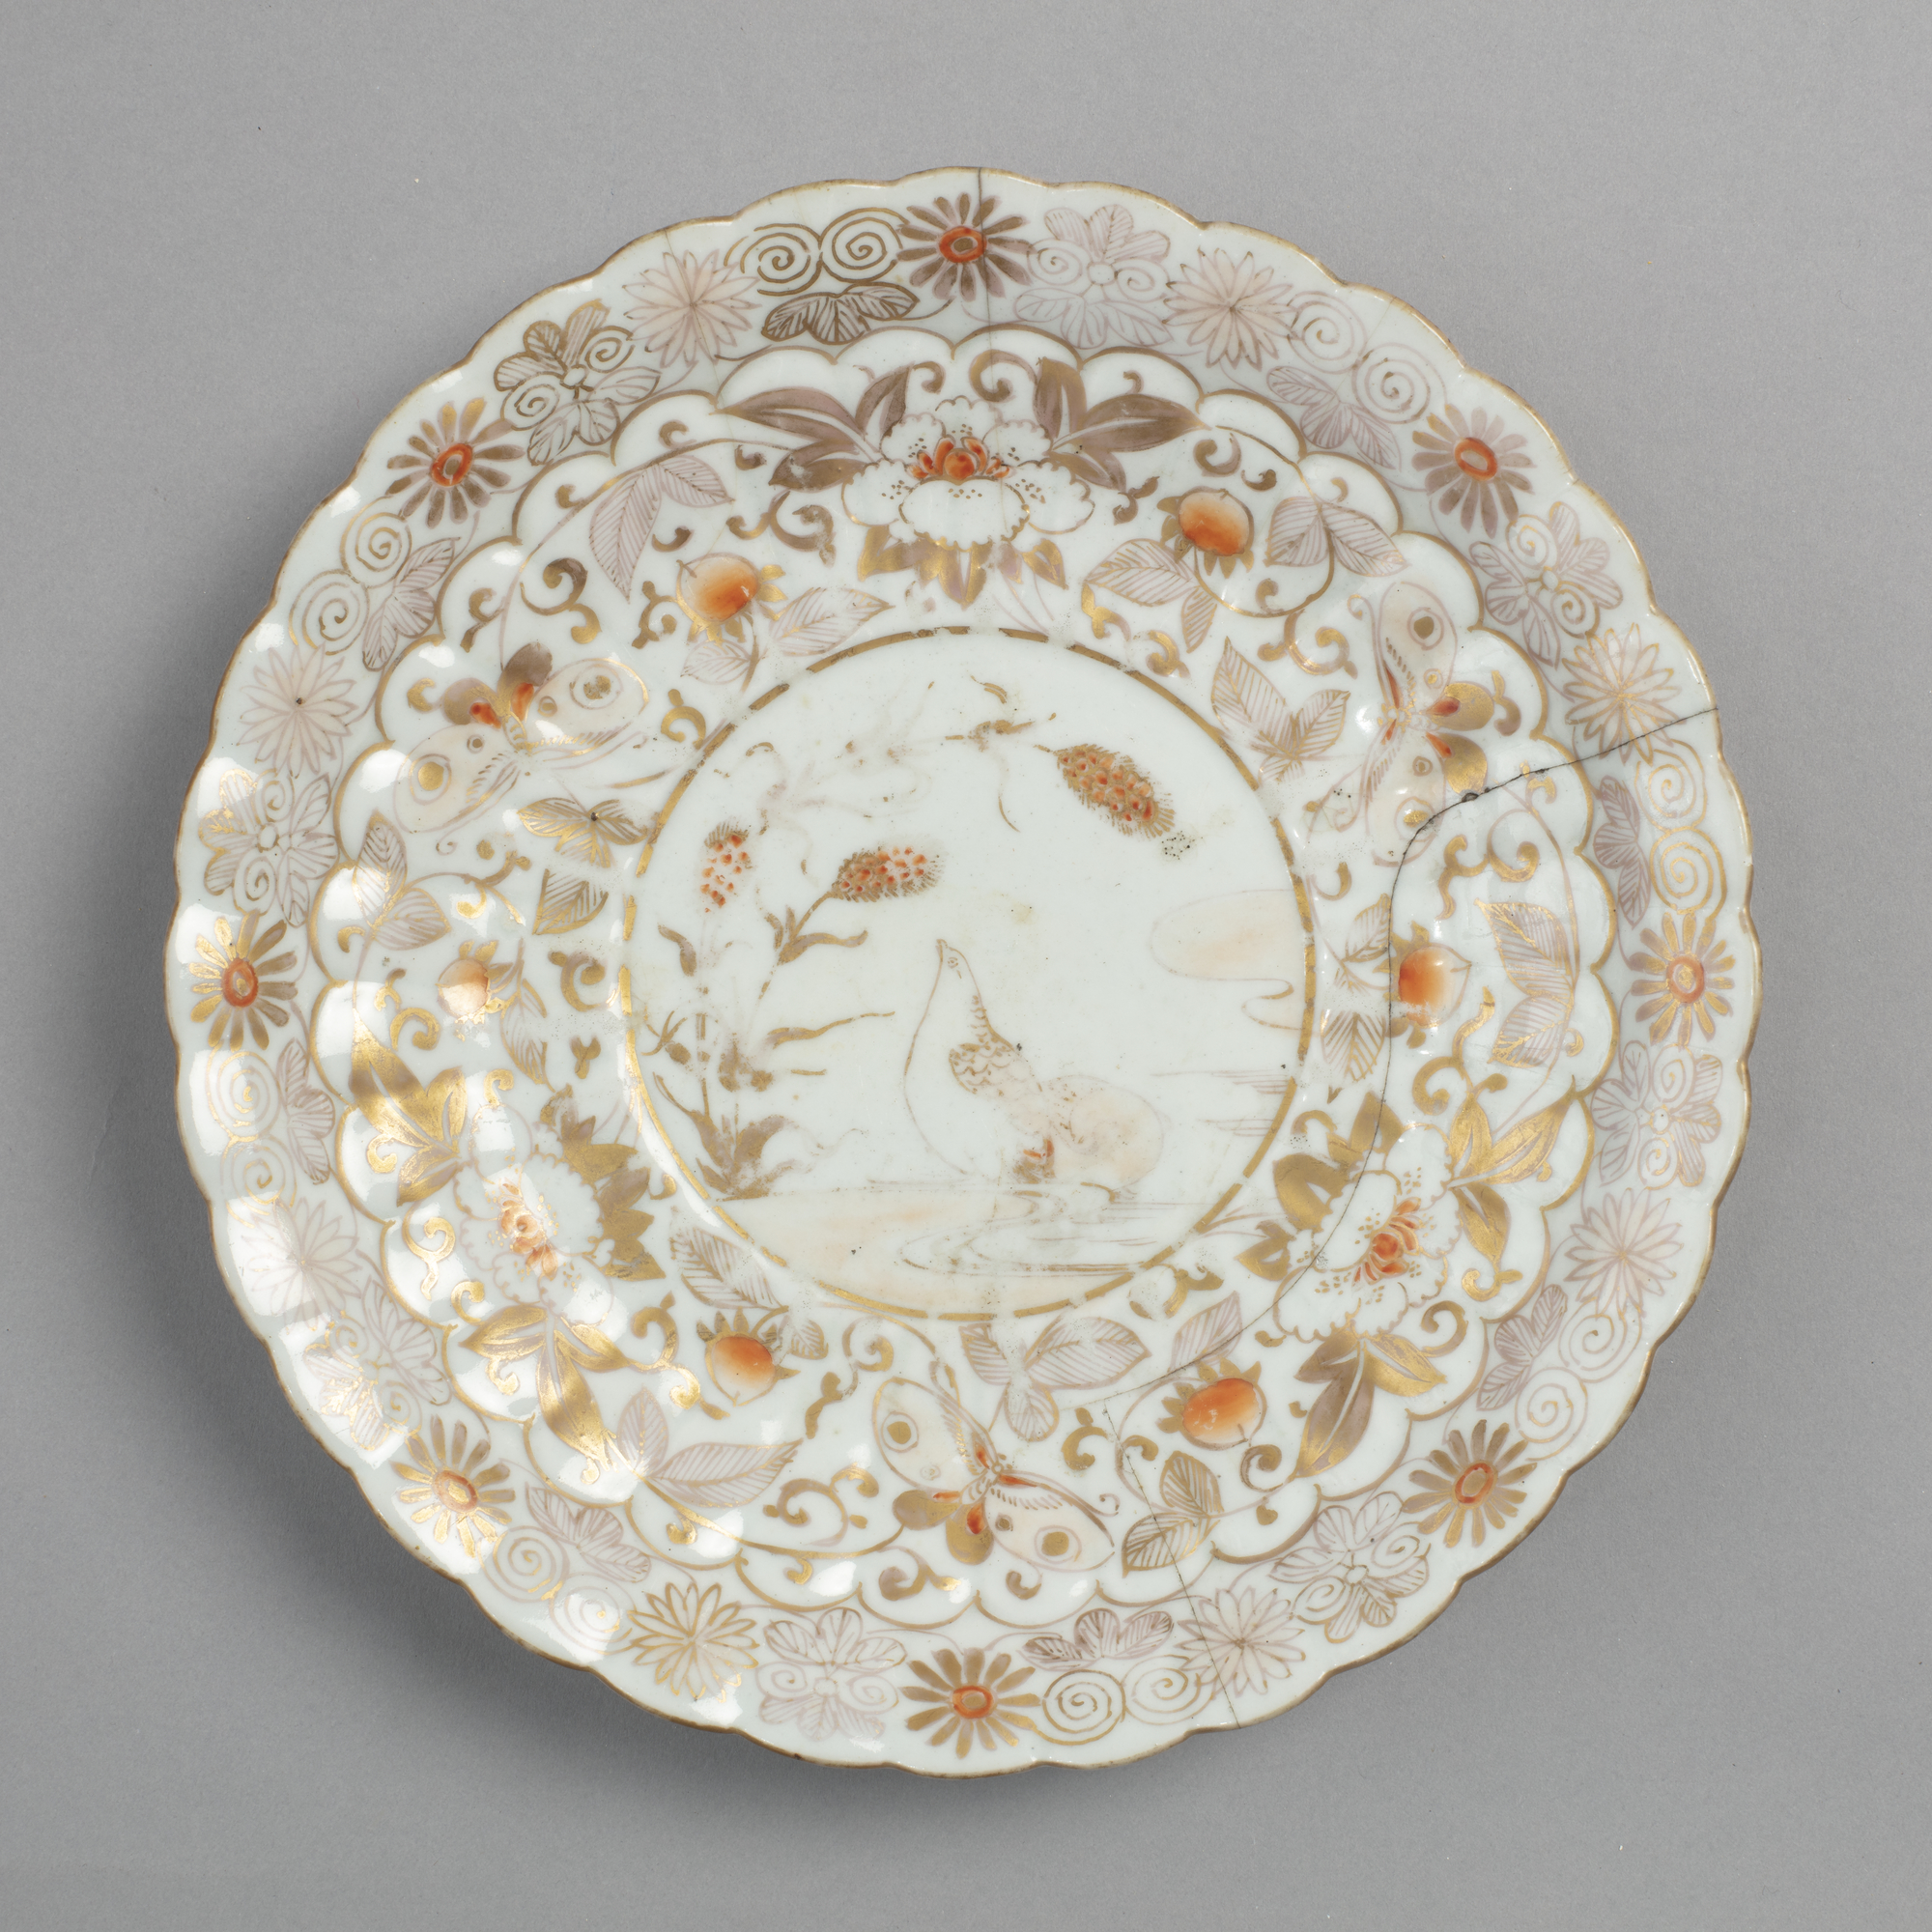 Dish with design of quails and millet in gold on white